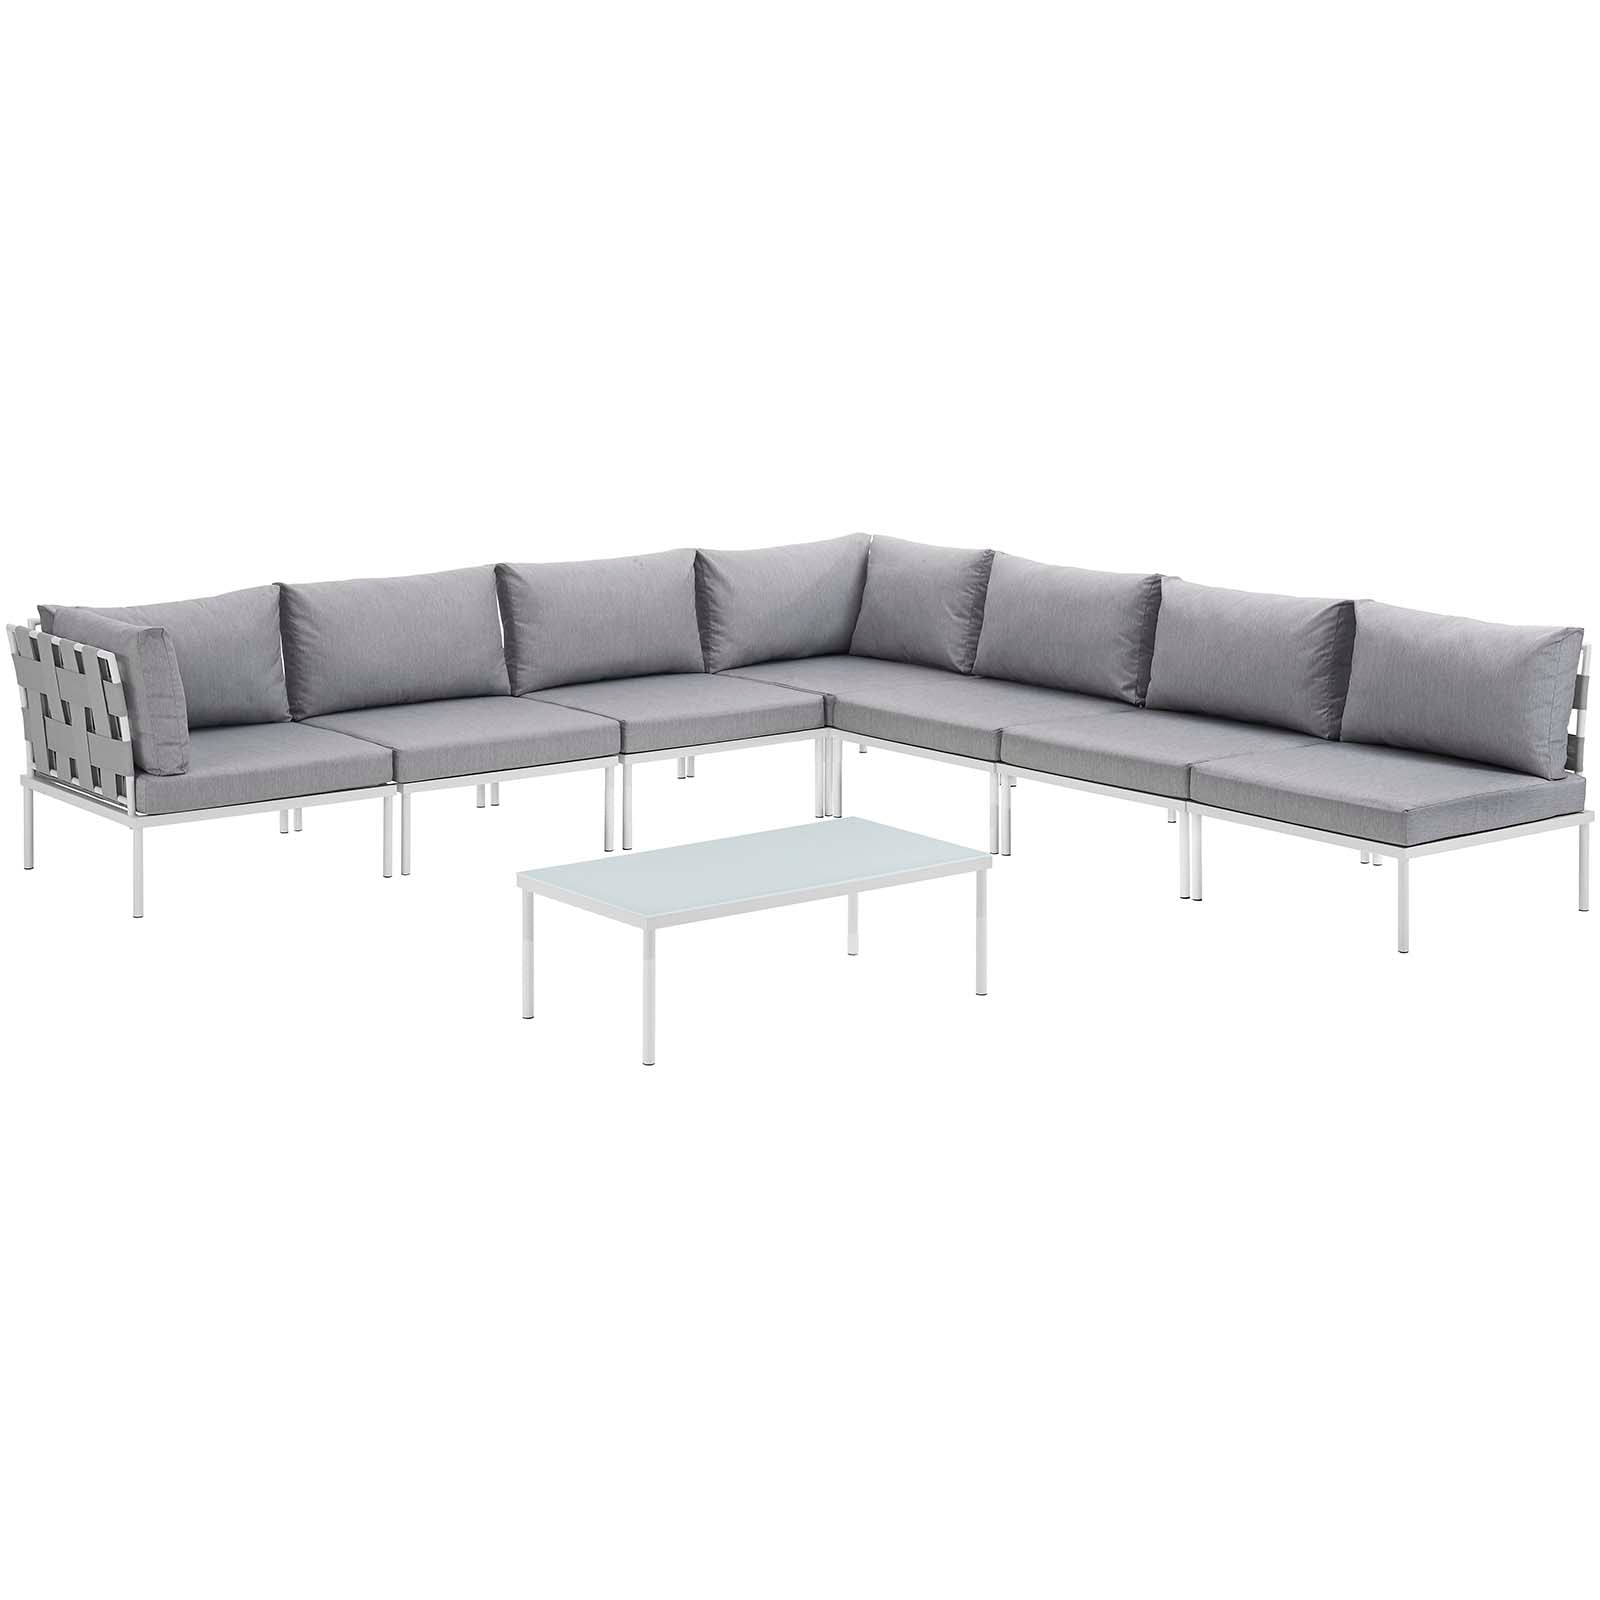 Modway Outdoor Conversation Sets - Harmony 8 Piece Outdoor Patio Sectional Sofa Set White Gray